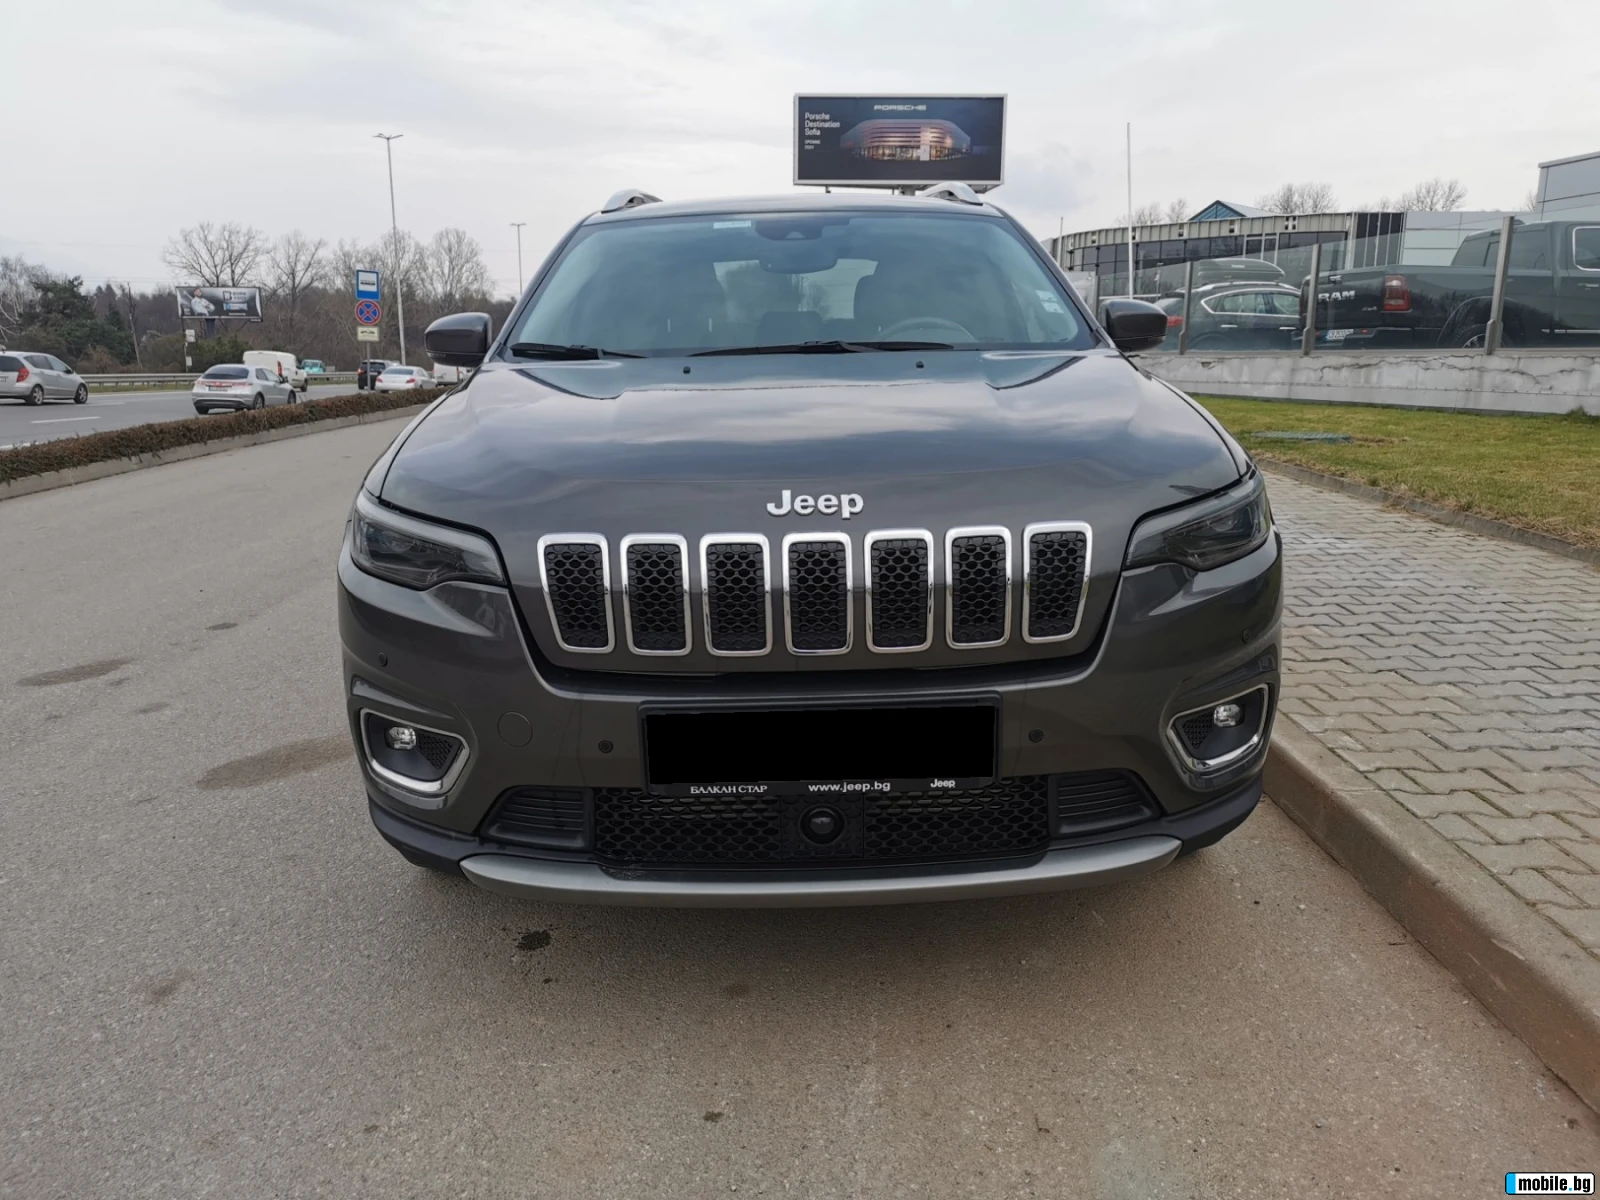 Jeep Cherokee LIMITED 2.2D AWD | Mobile.bg   2